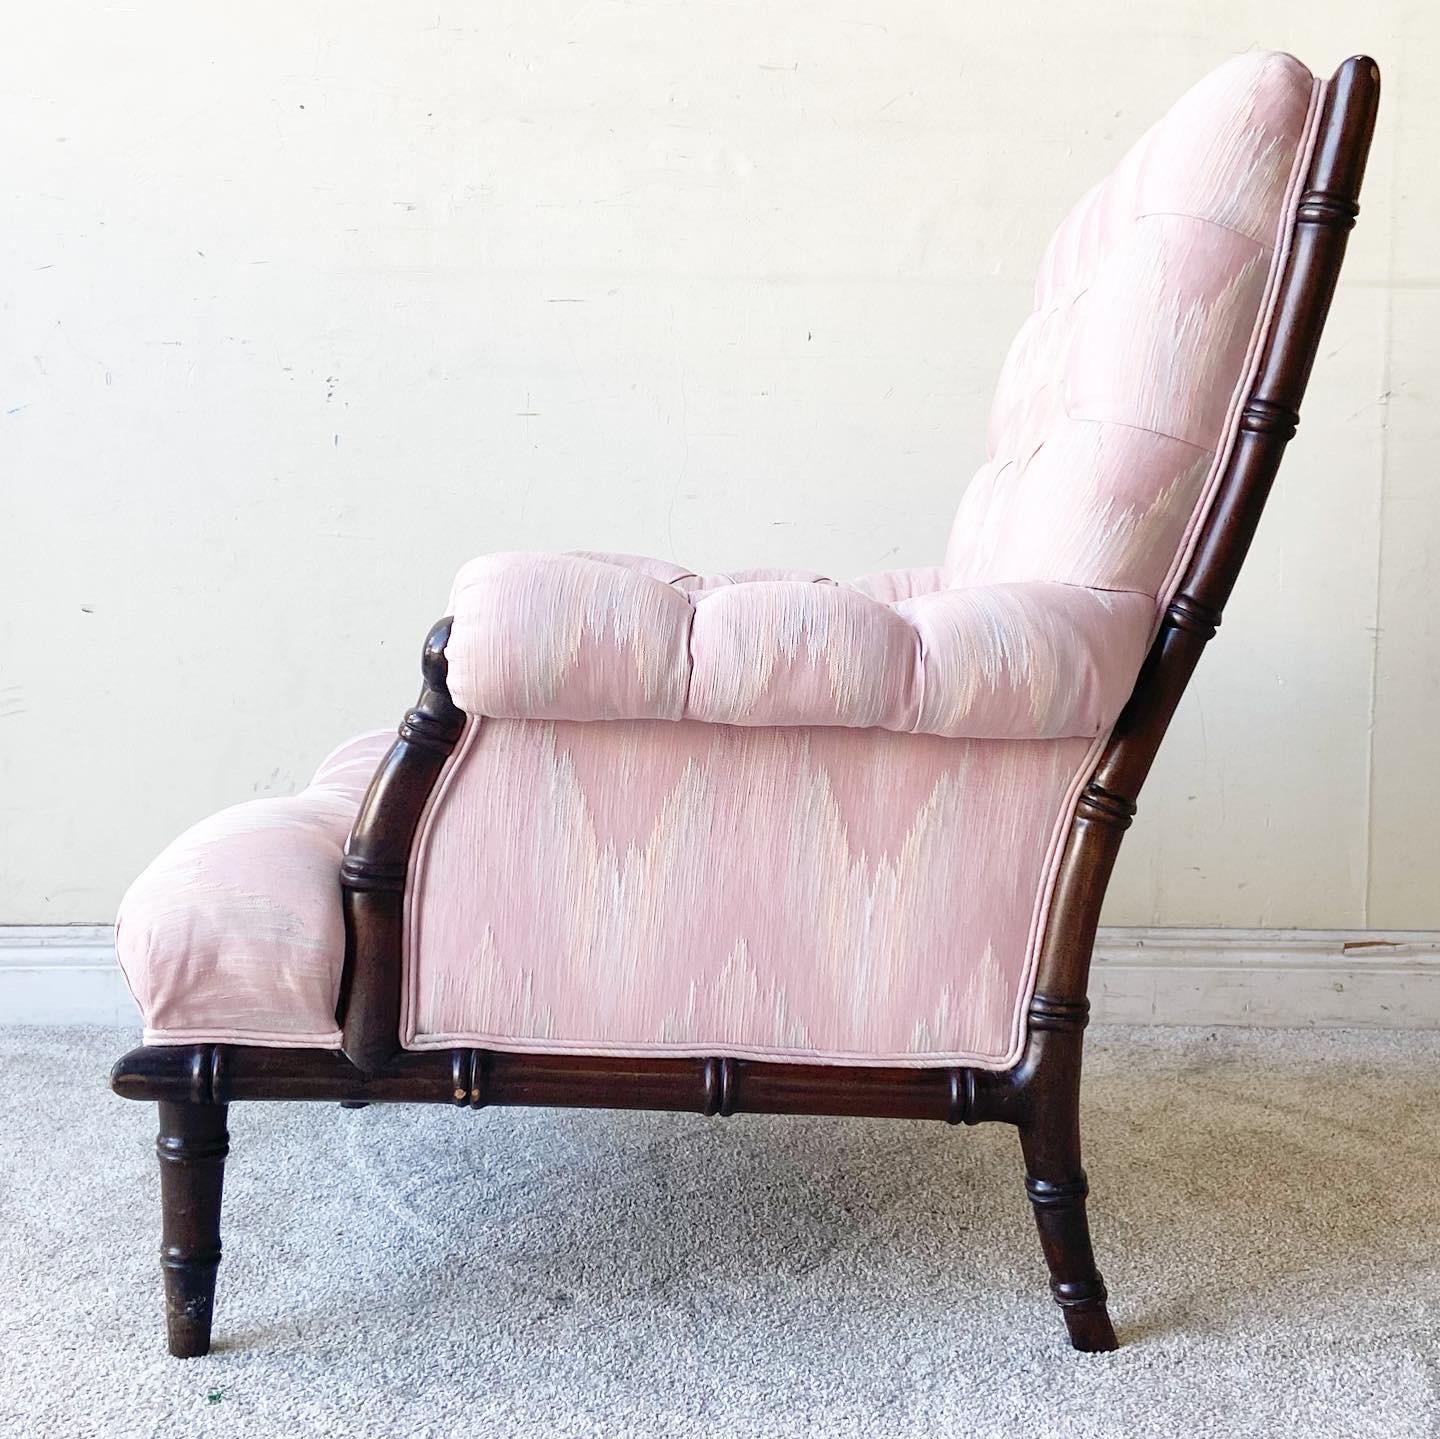 Exceptional boho chic/regency lounge chair with Ottoman. Features a tufted pink fabric with a faux bamboo frame.

Ottoman measures 29”W, 21”D, 14.5”H.